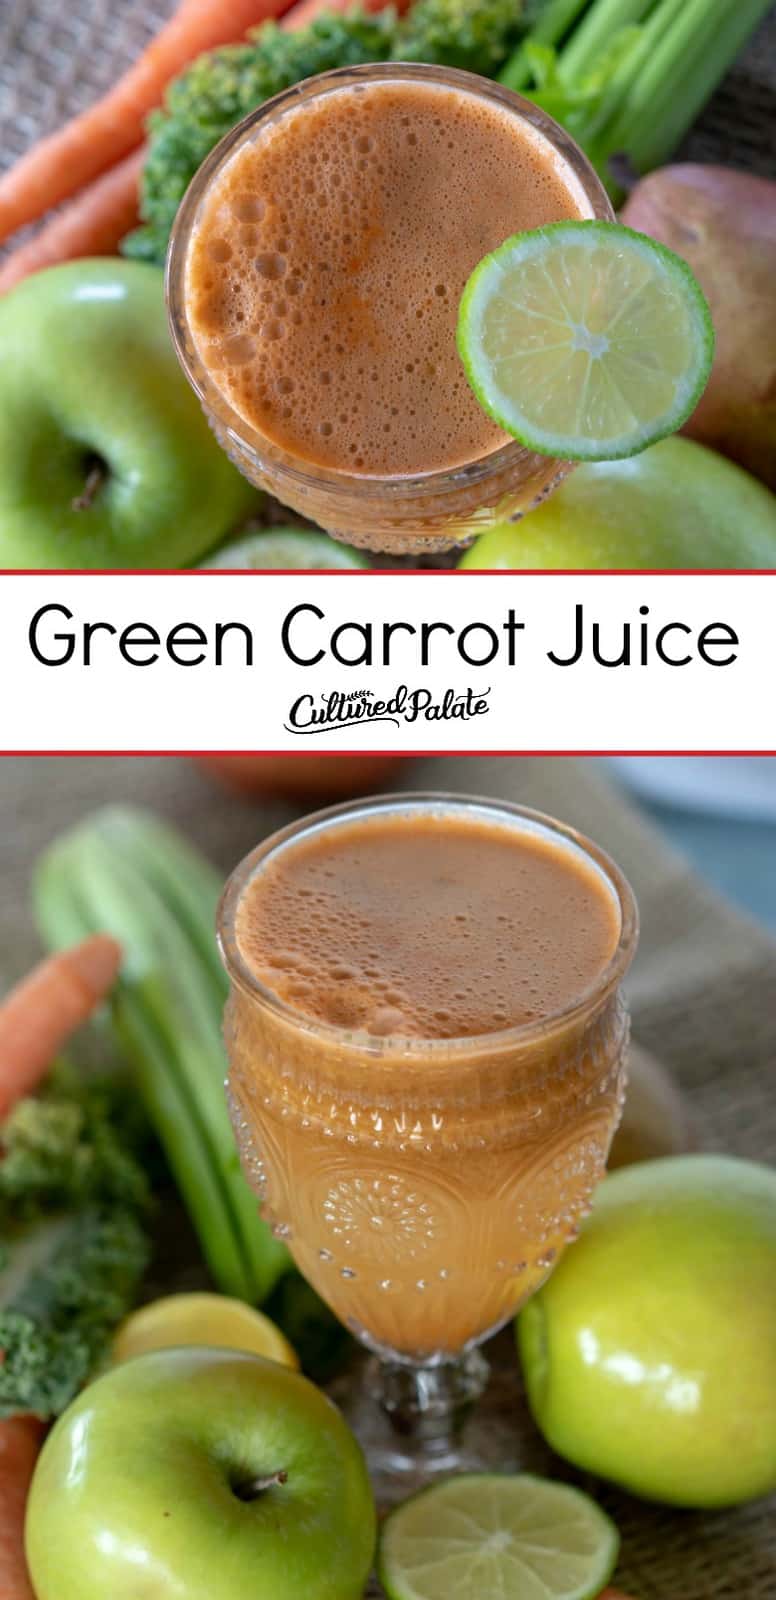 Green Carrot Juice Recipe shown in glass with two images and text overlay.